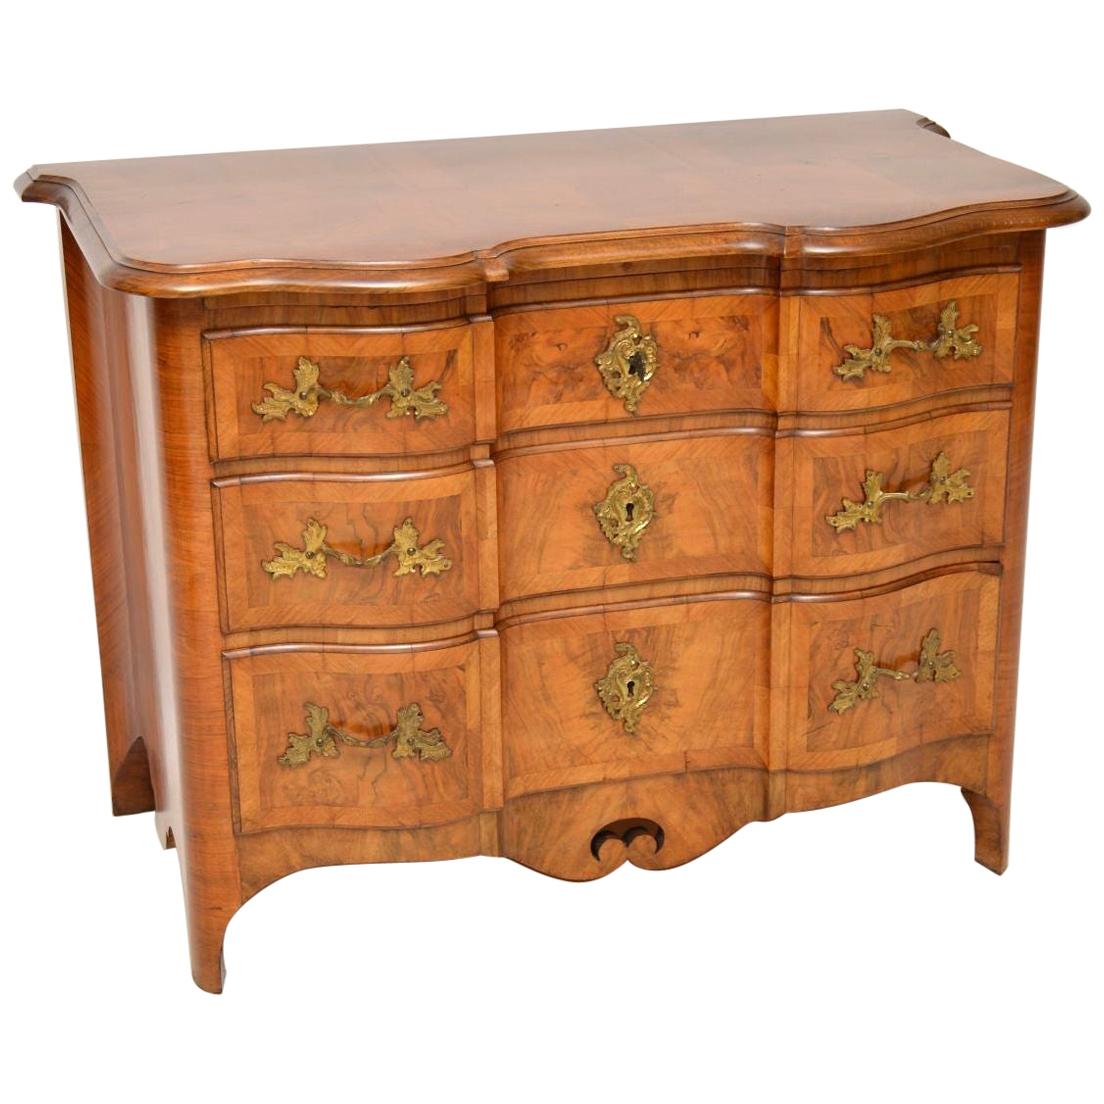 Antique Swedish Walnut Commode / Chest of Drawers